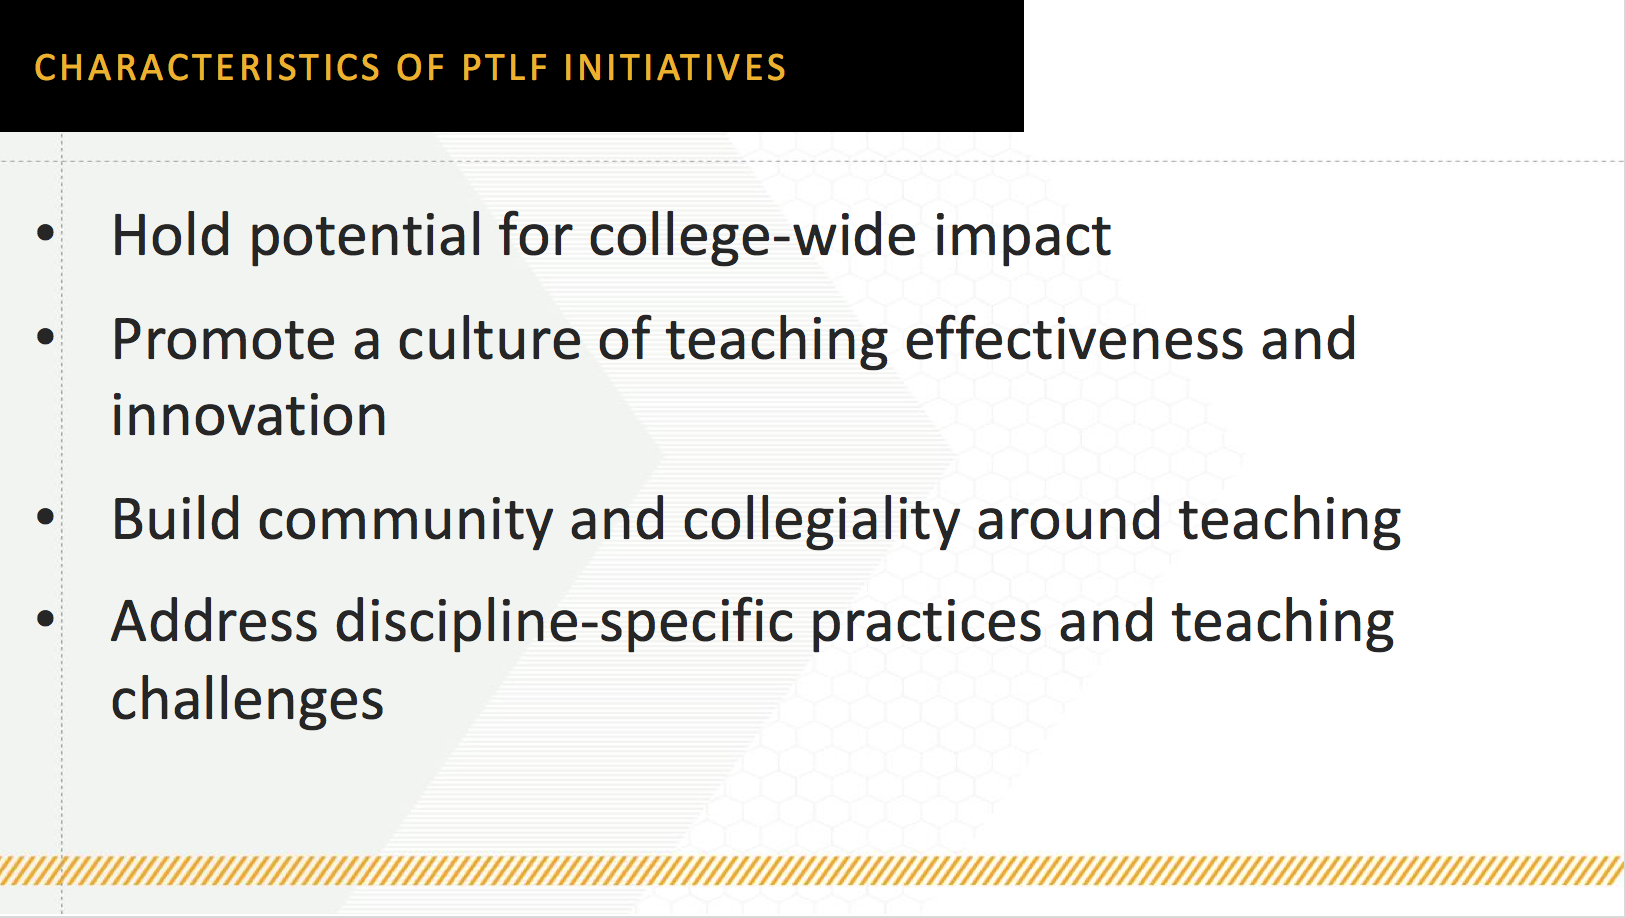 Slide that describes characteristics of PTLF initiatives